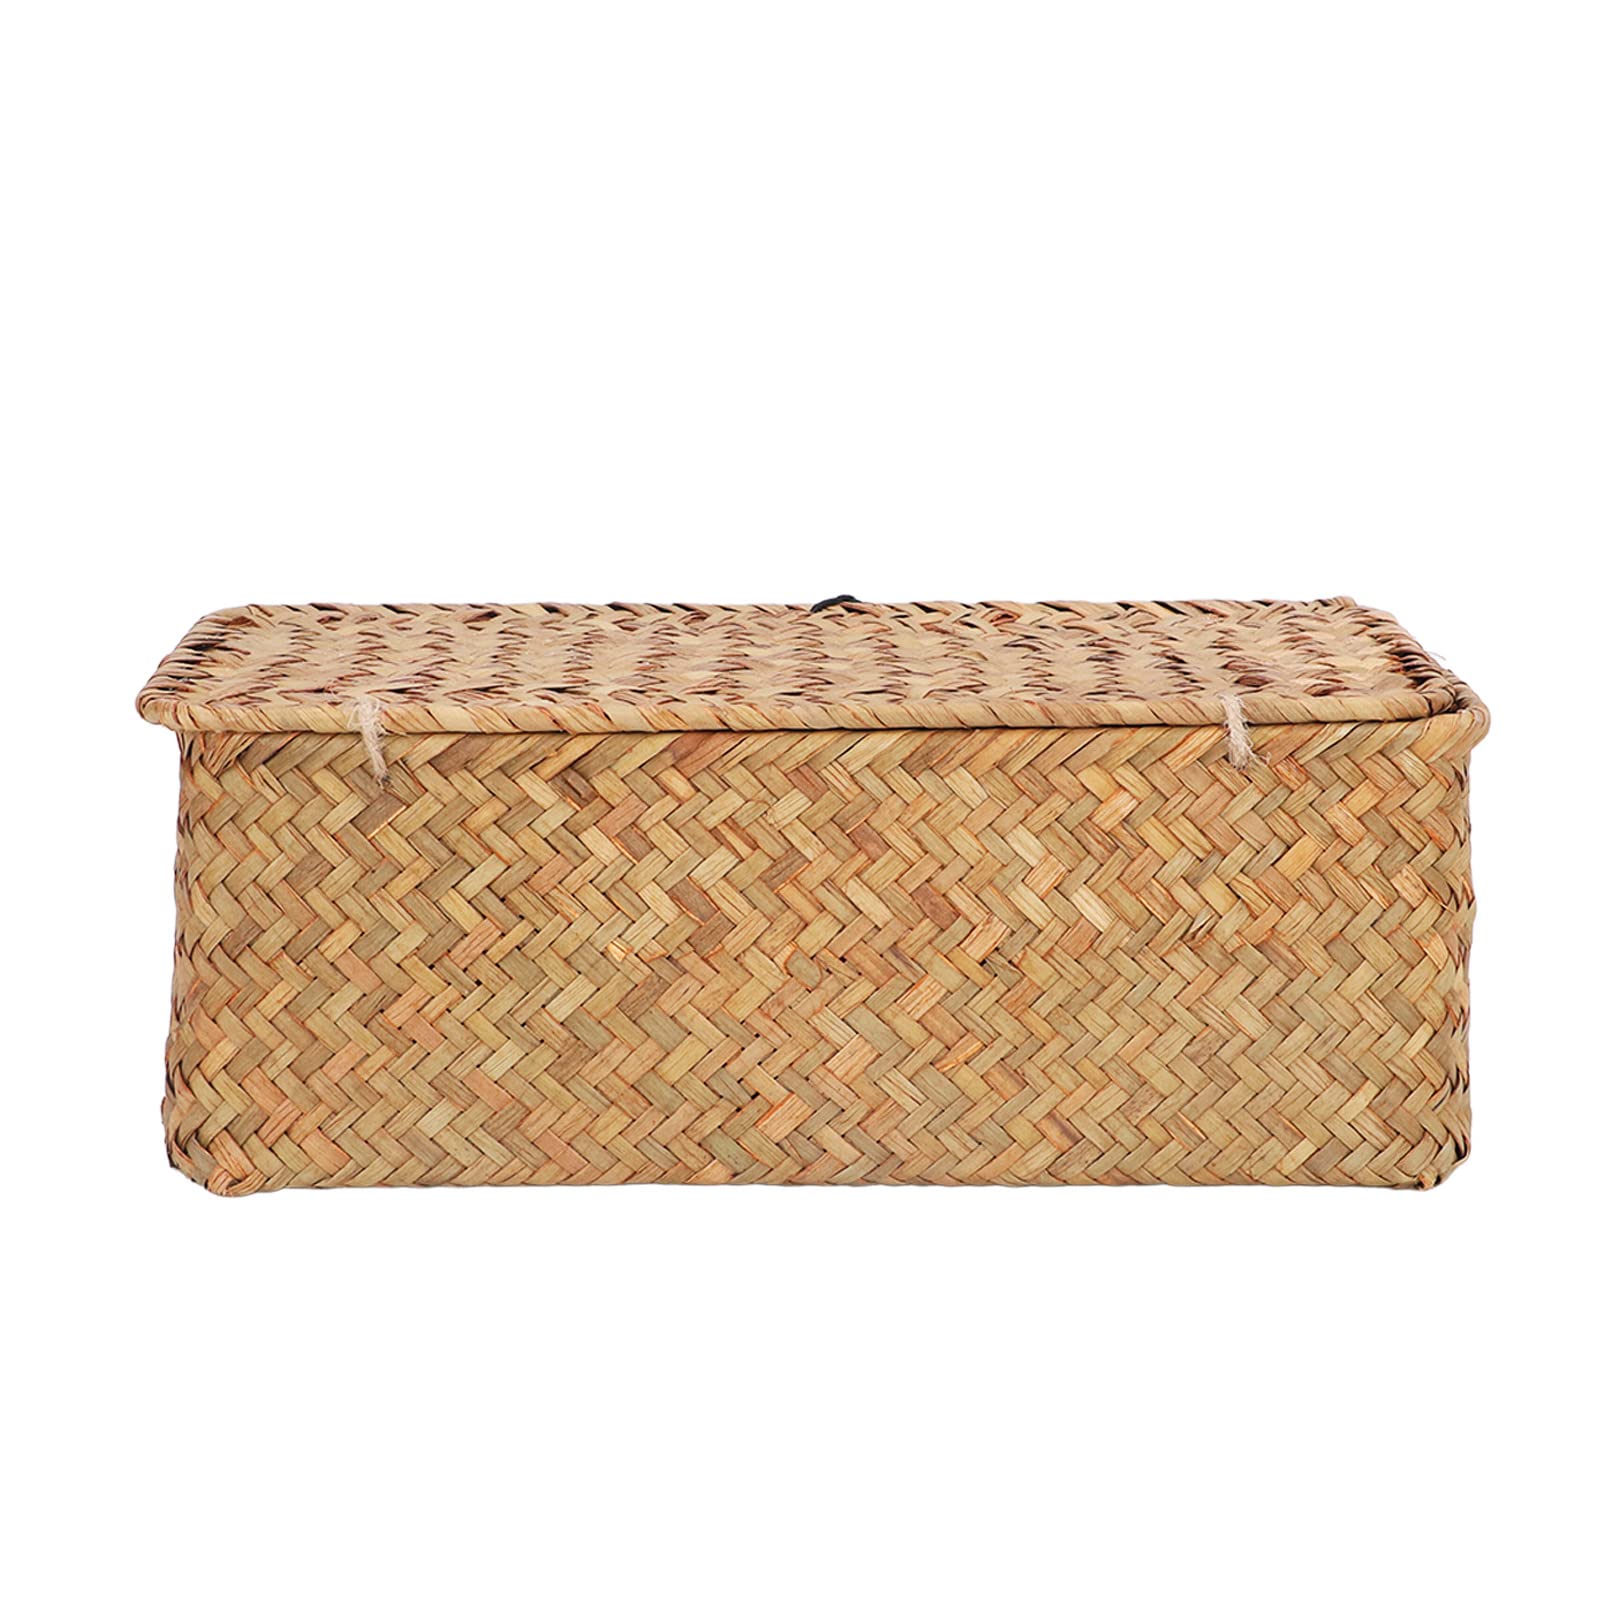 CHICIRIS Seagrass Basket with Lid, Wicker Storage Basket with Lid Hand Woven Rectangular Shelf Organizer Box Organizing Bin for Home Living Room Bedroom (Caramel) (M)